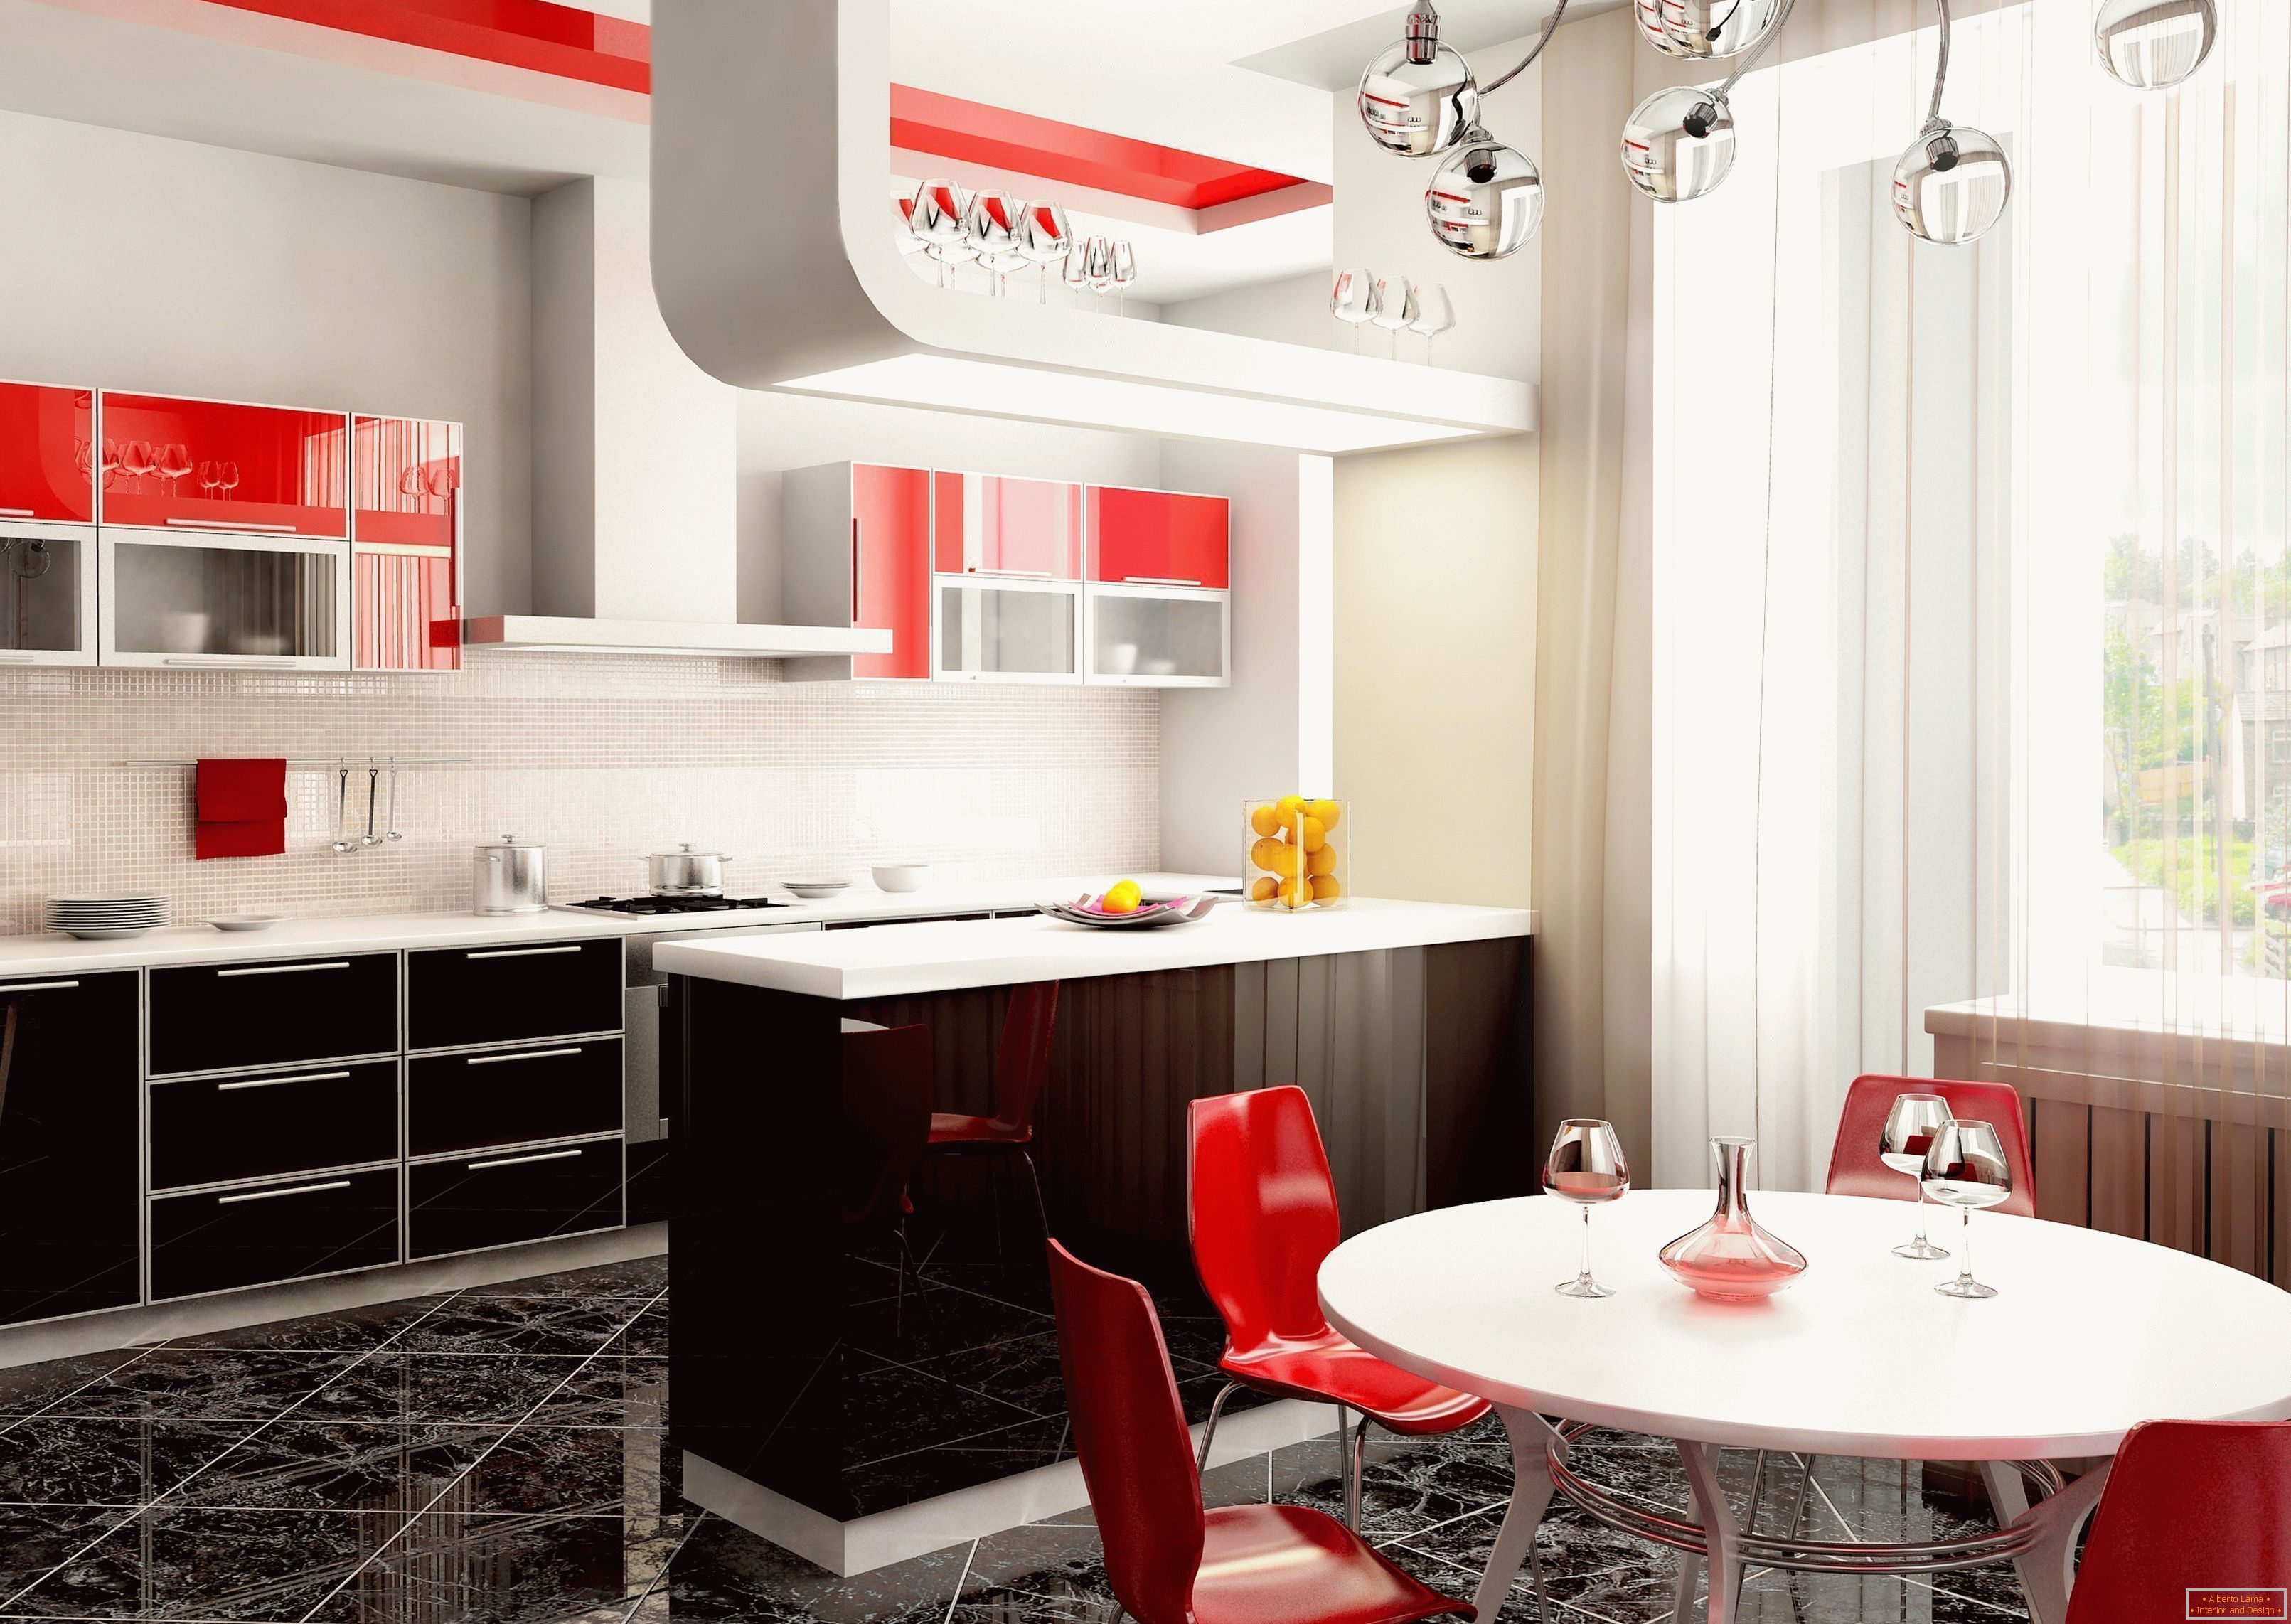 Bright interior of the kitchen in the apartment with red accents